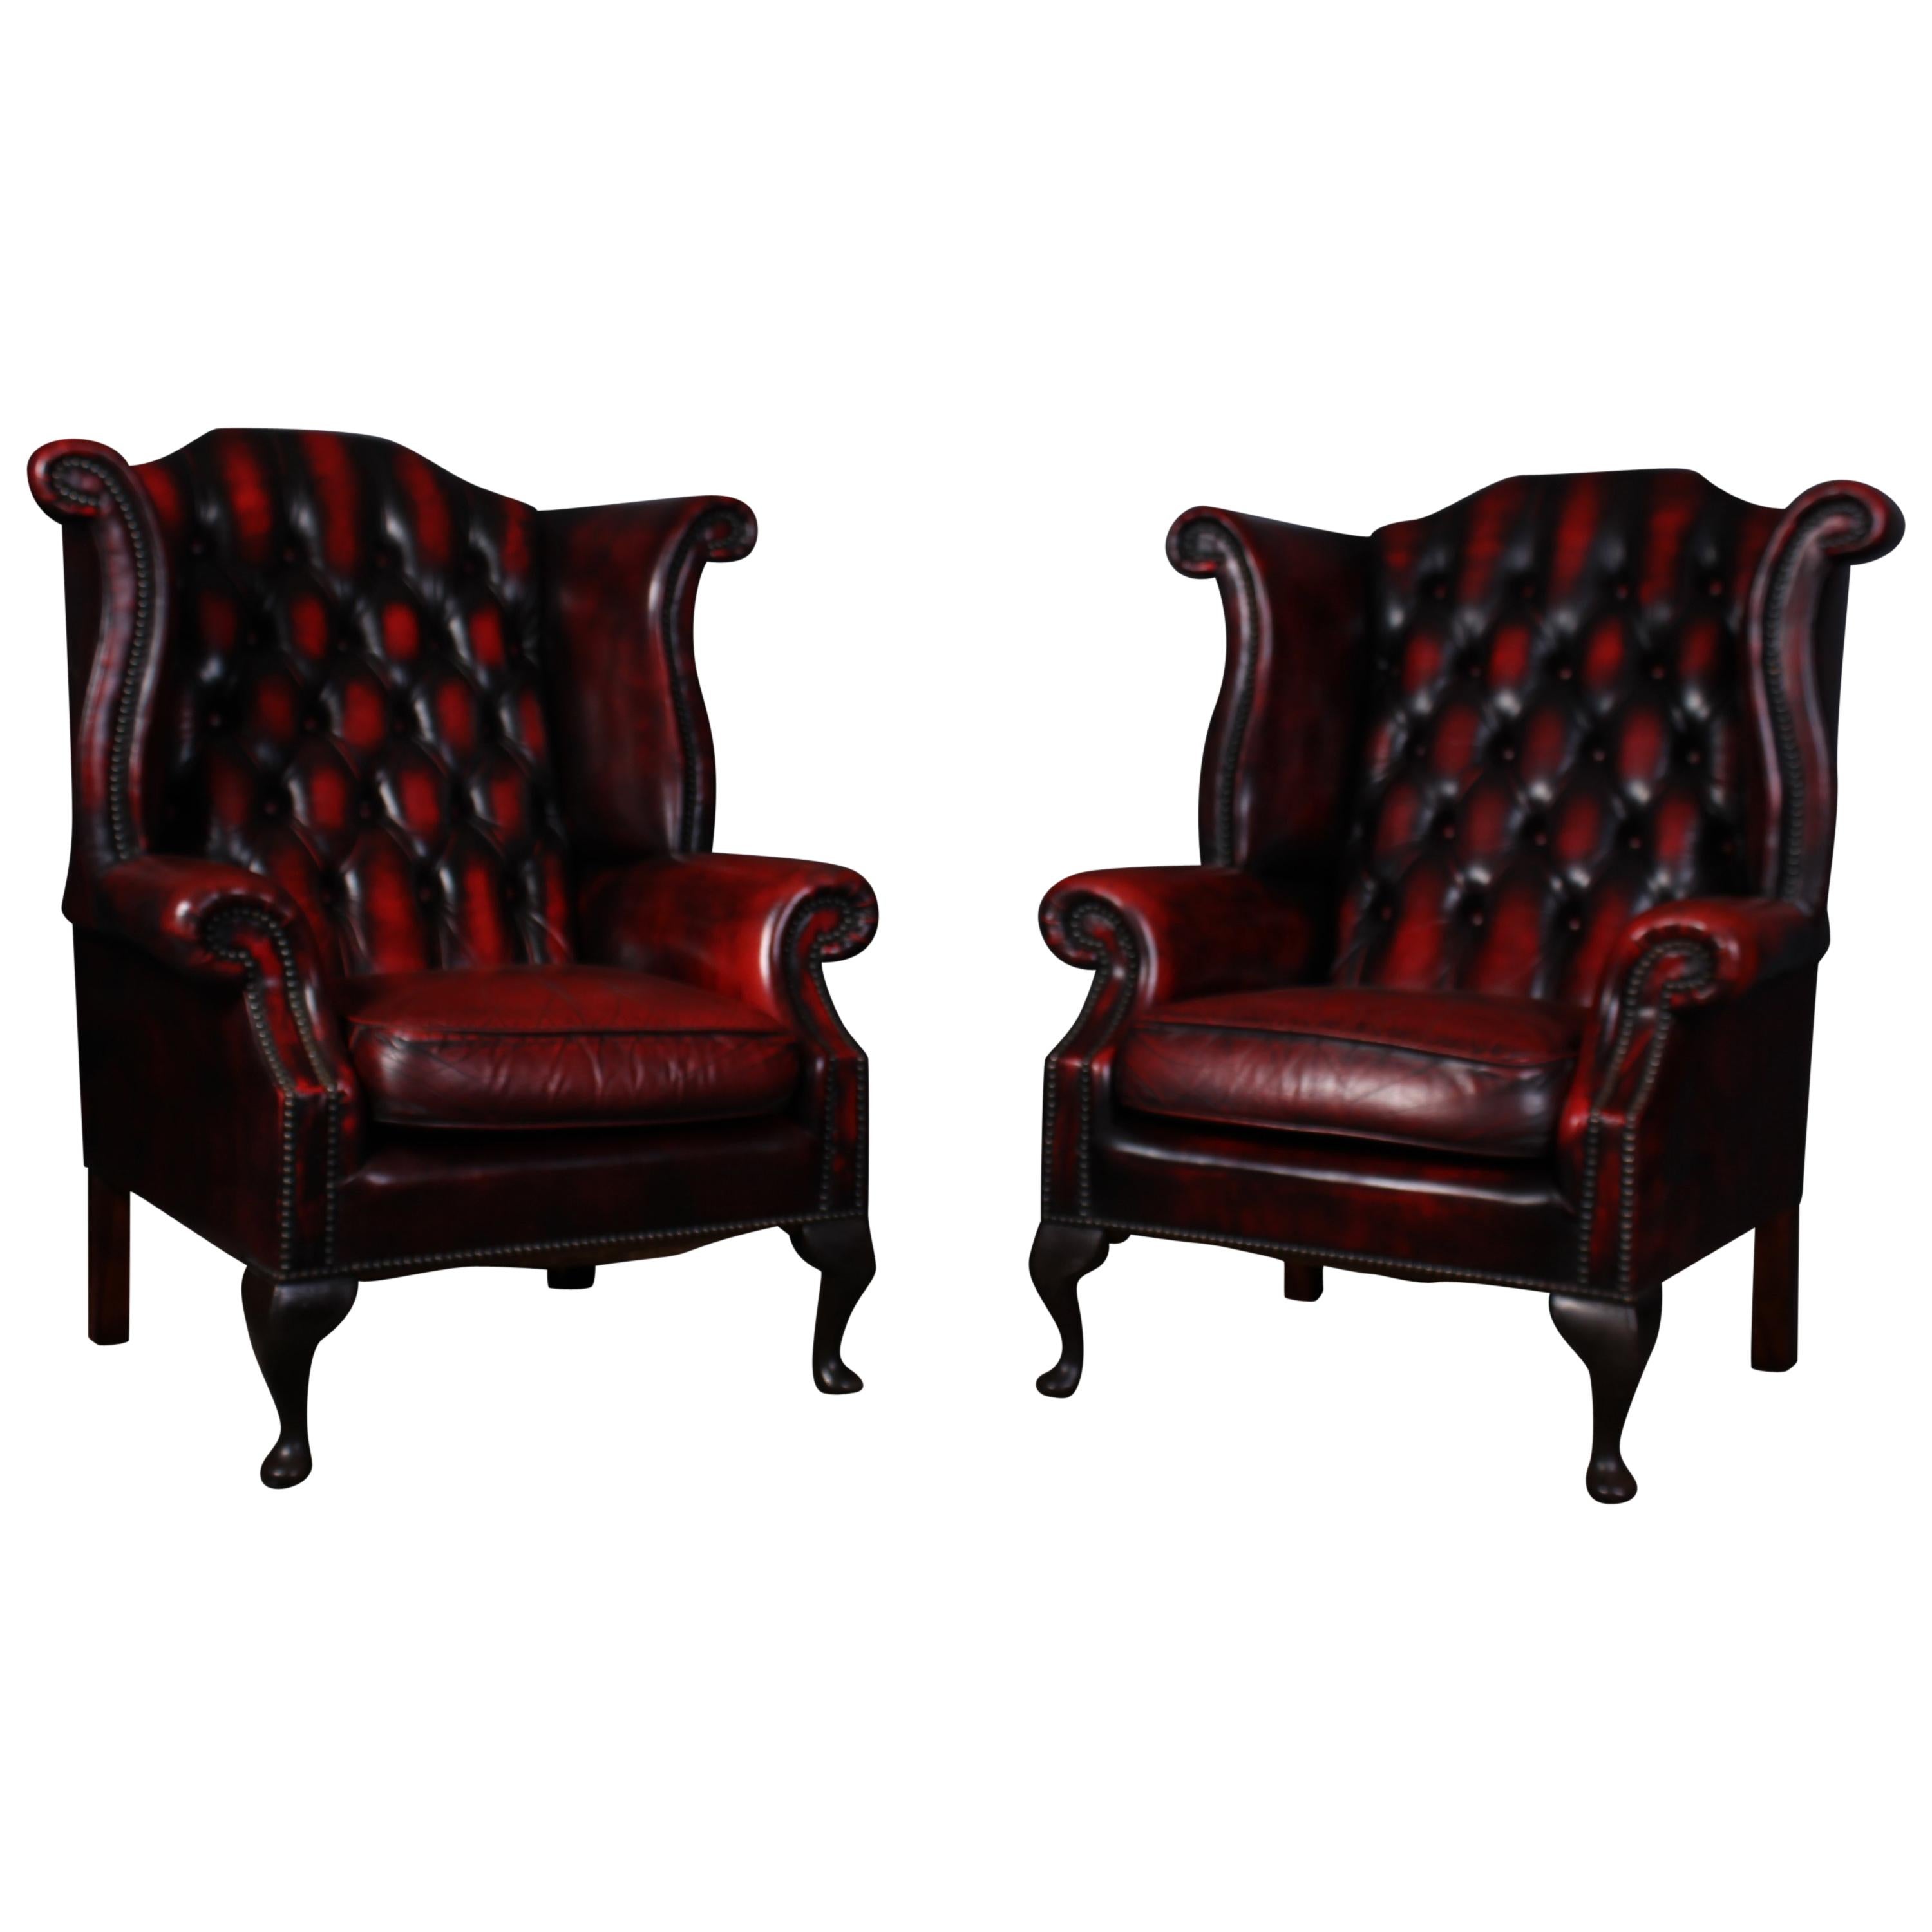 Pair of Chesterfield Queen Anne Wing Back Chairs